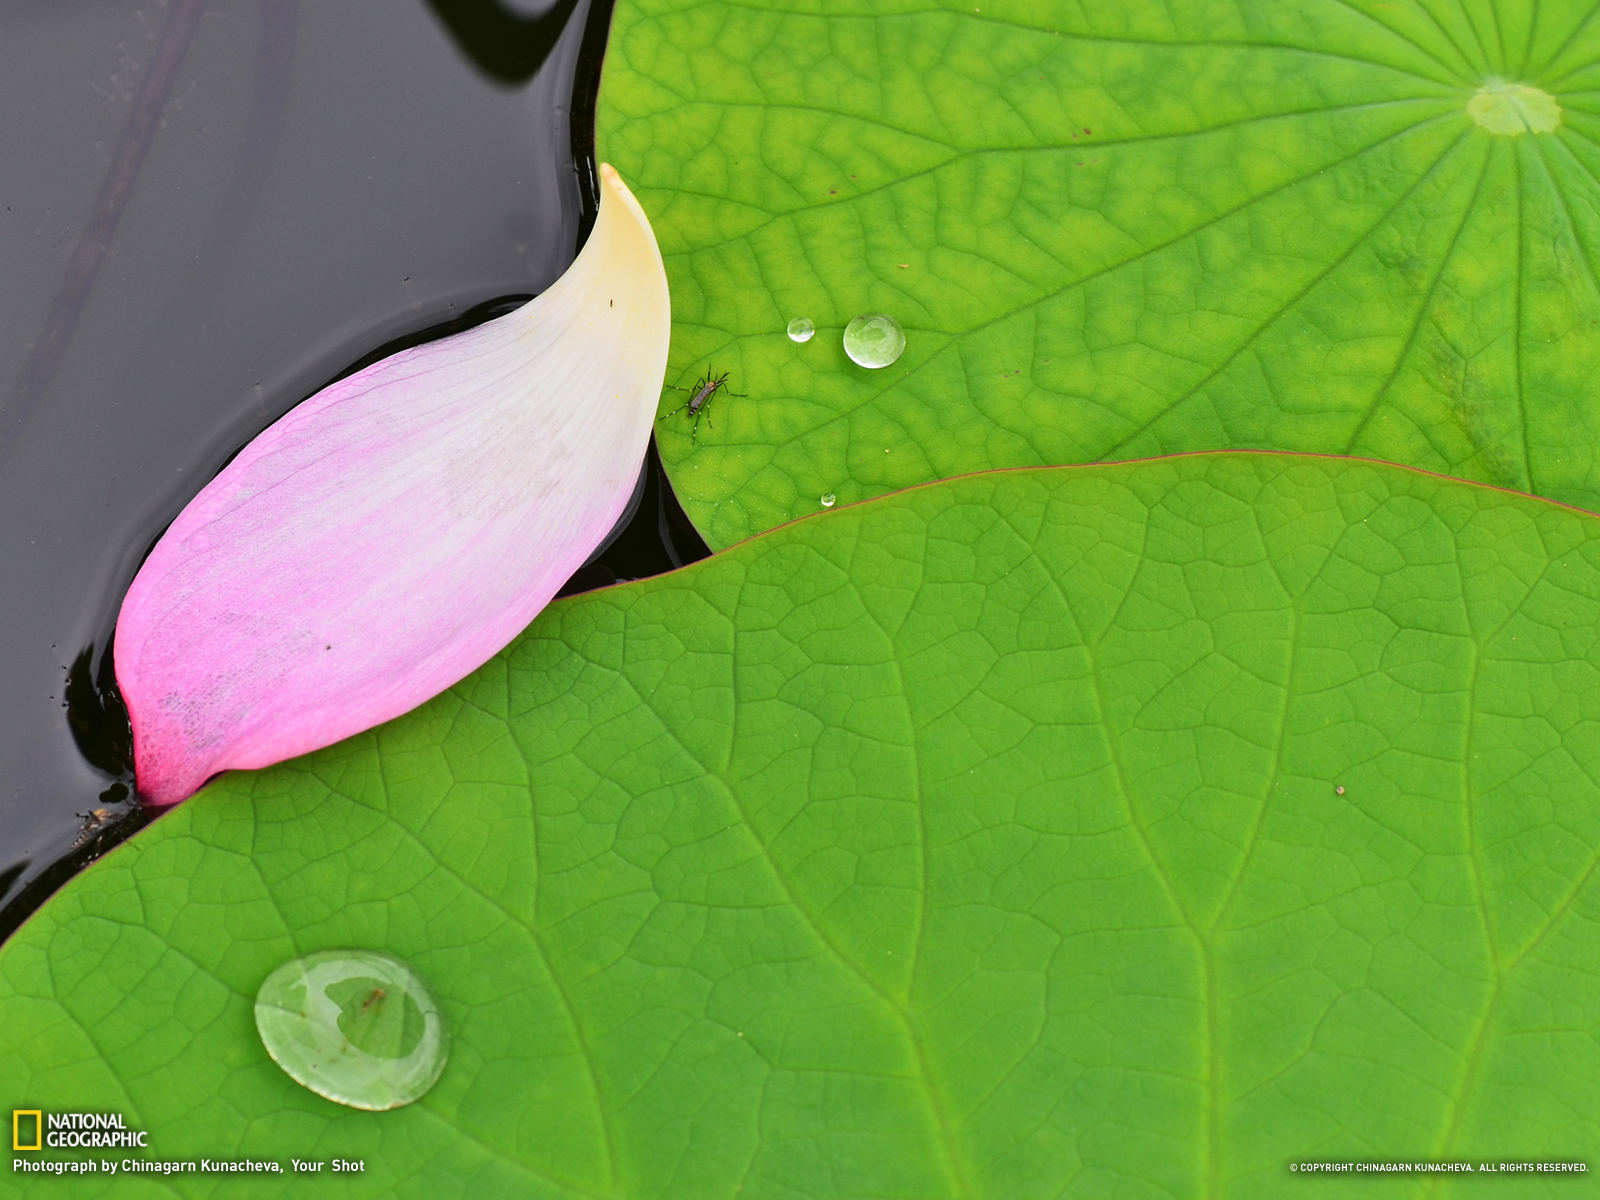 Lotus Picture Flower Wallpaper National Geographic Photo Of The